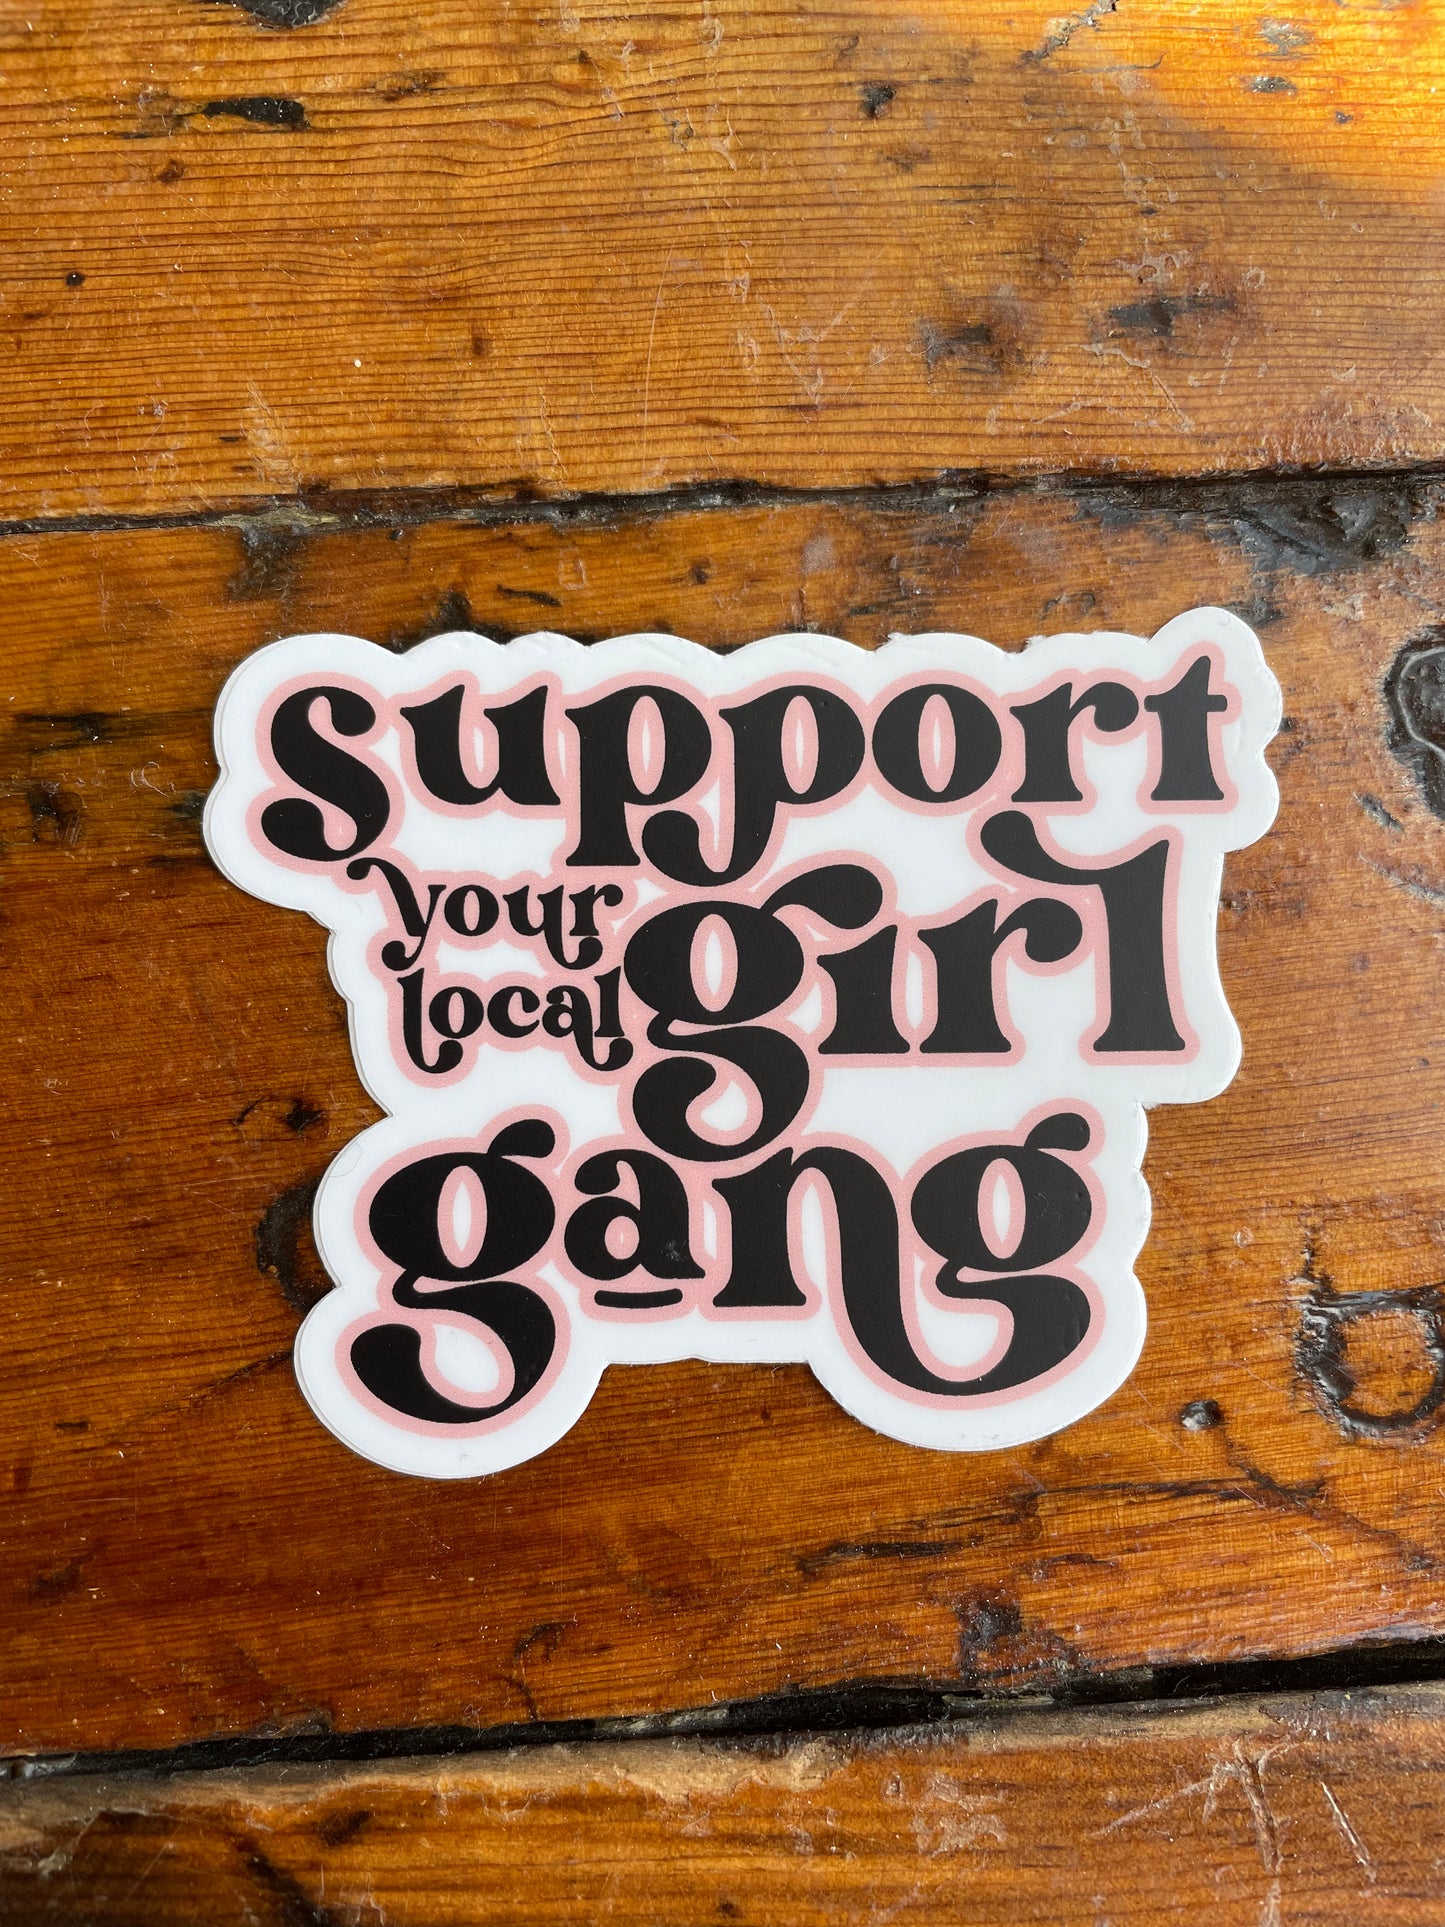 Support Your Local Girl Gang